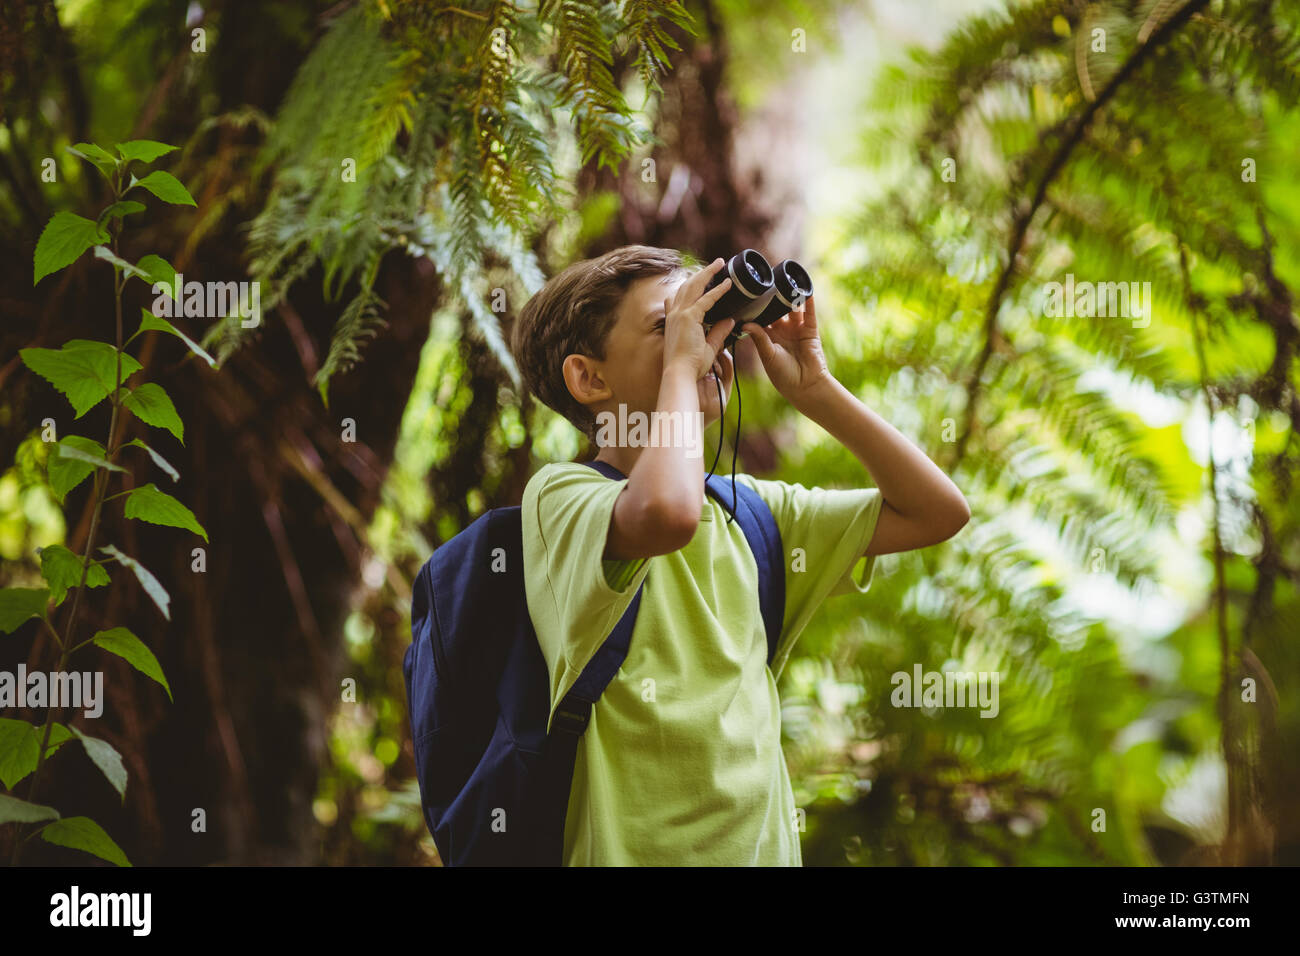 Young boy looking through binoculars in forest Stock Photo